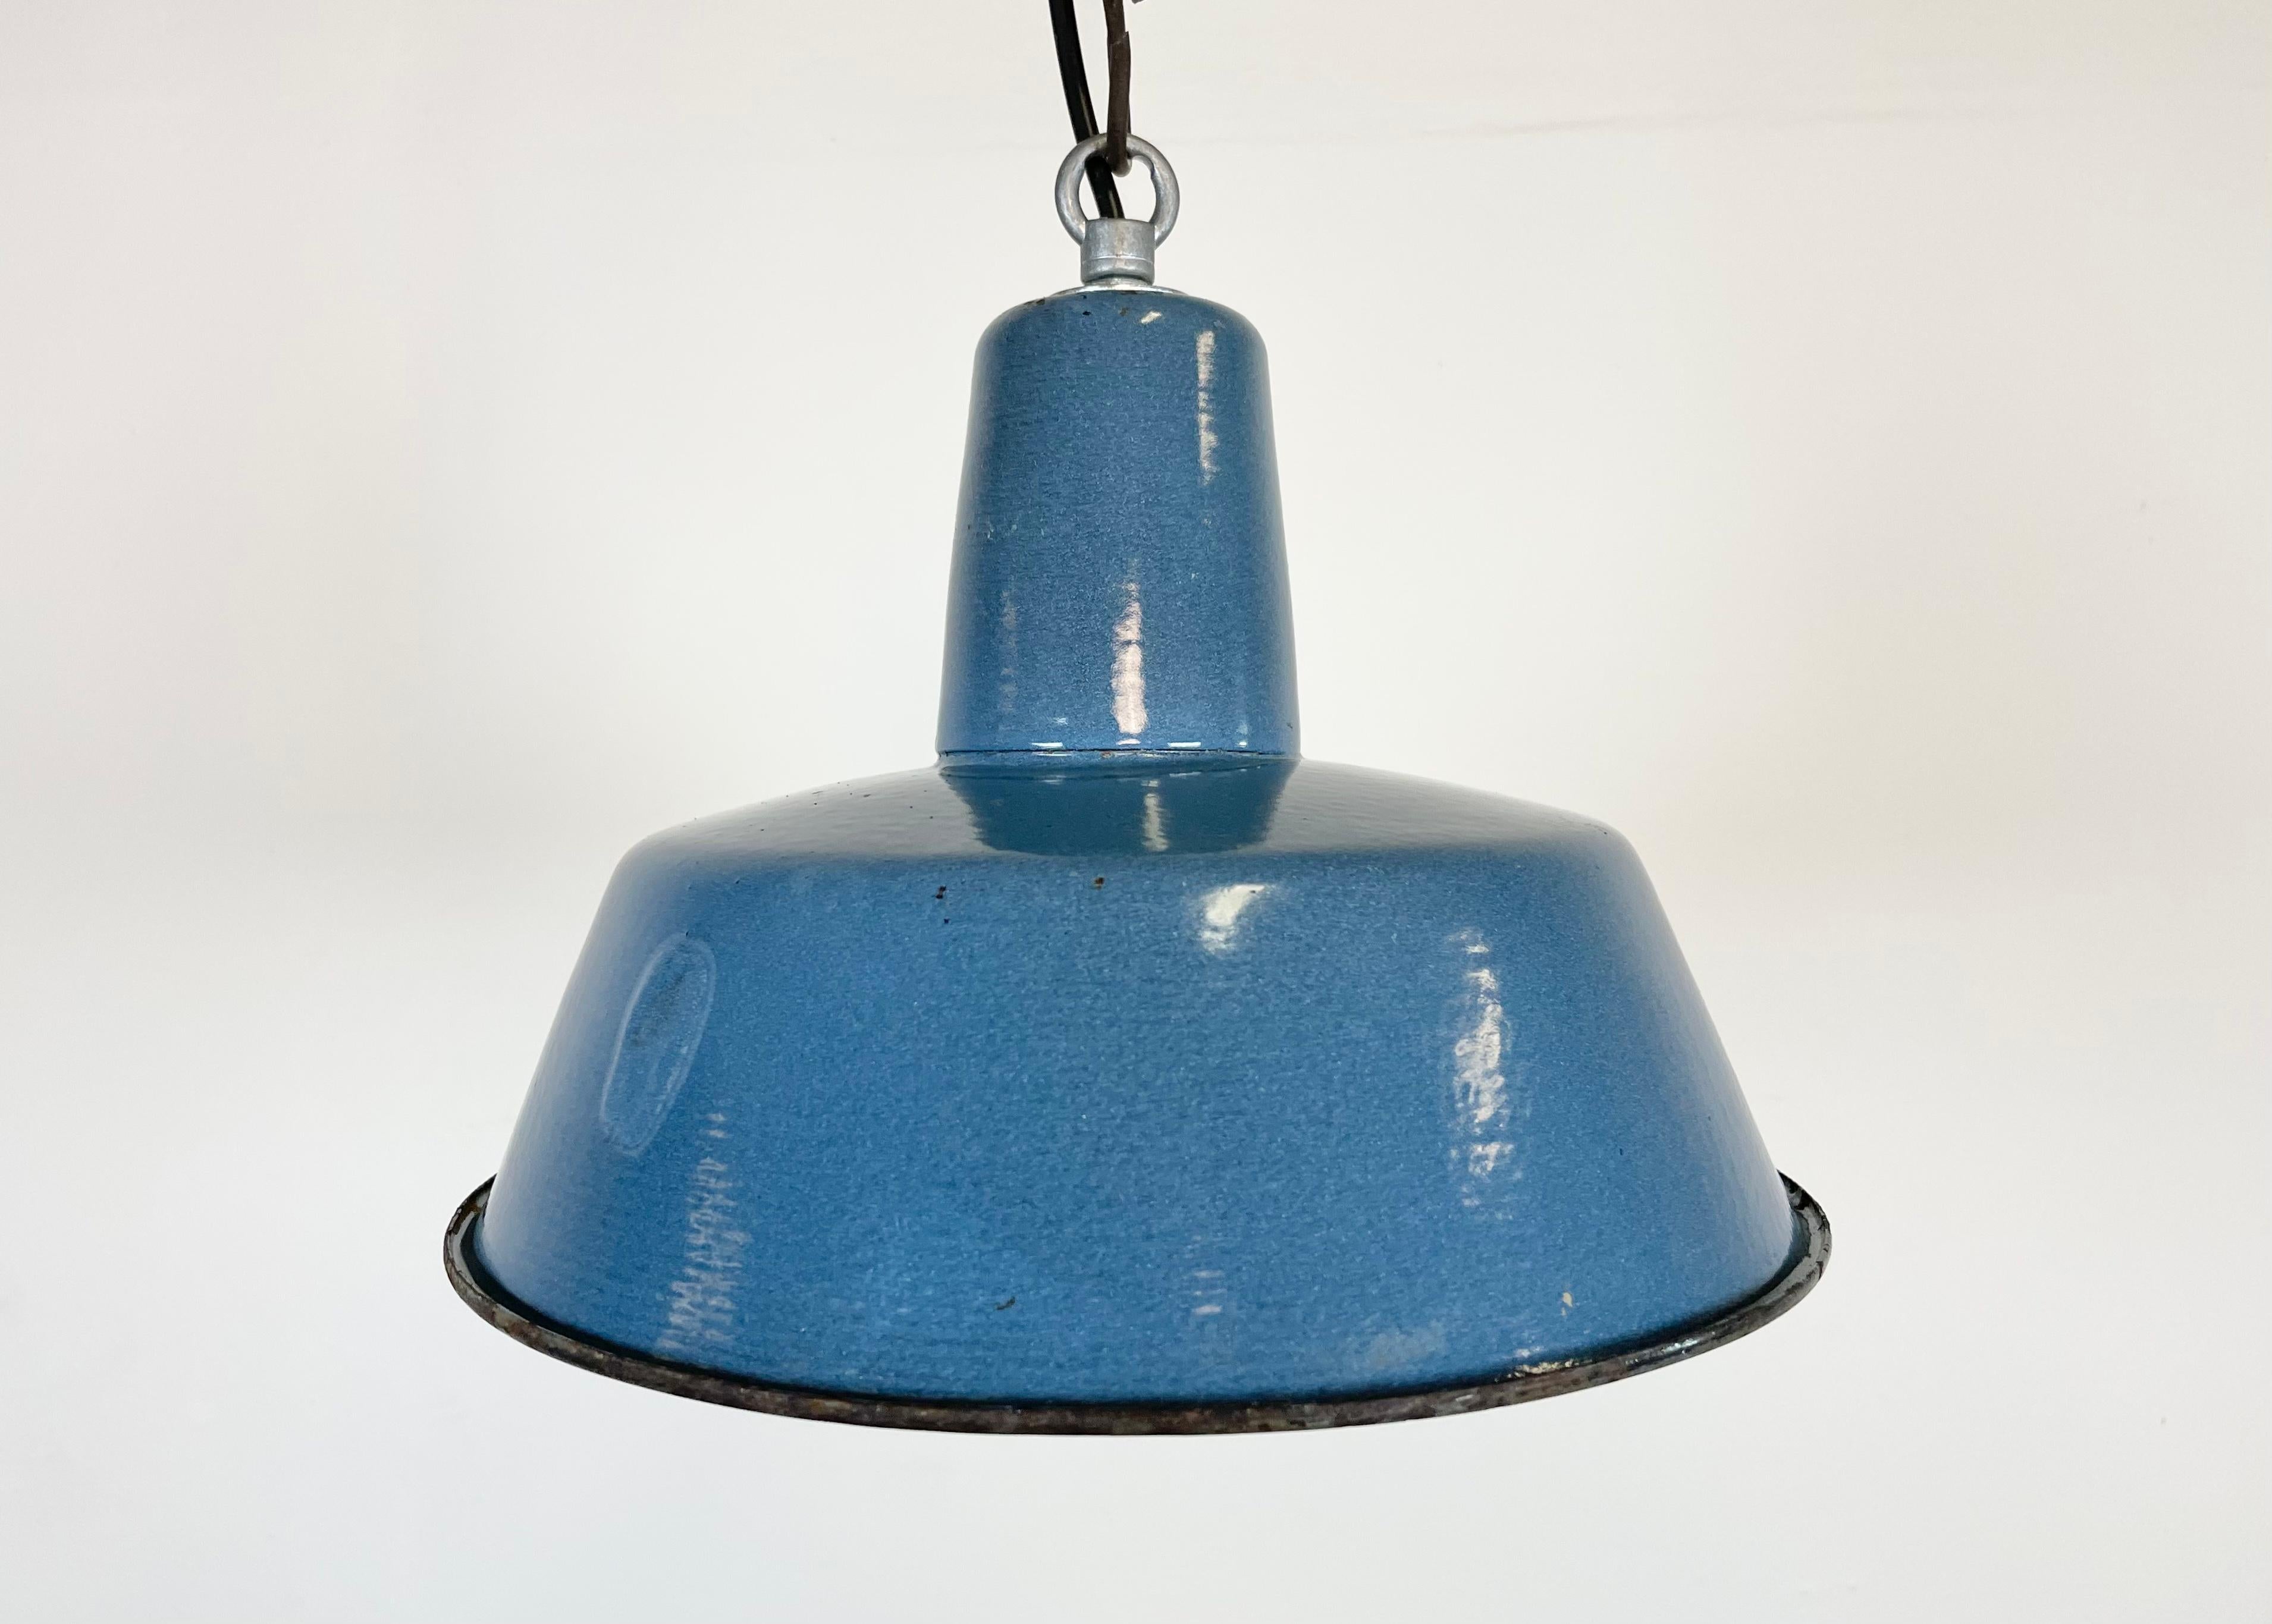 Industrial blue enamel pendant light made in Poland during the 1960s. White enamel inside the shade. Iron top. The porcelain socket requires E 27/ E 26 light bulbs. New wire. Fully functional. The weight of the lamp is 1 kg.